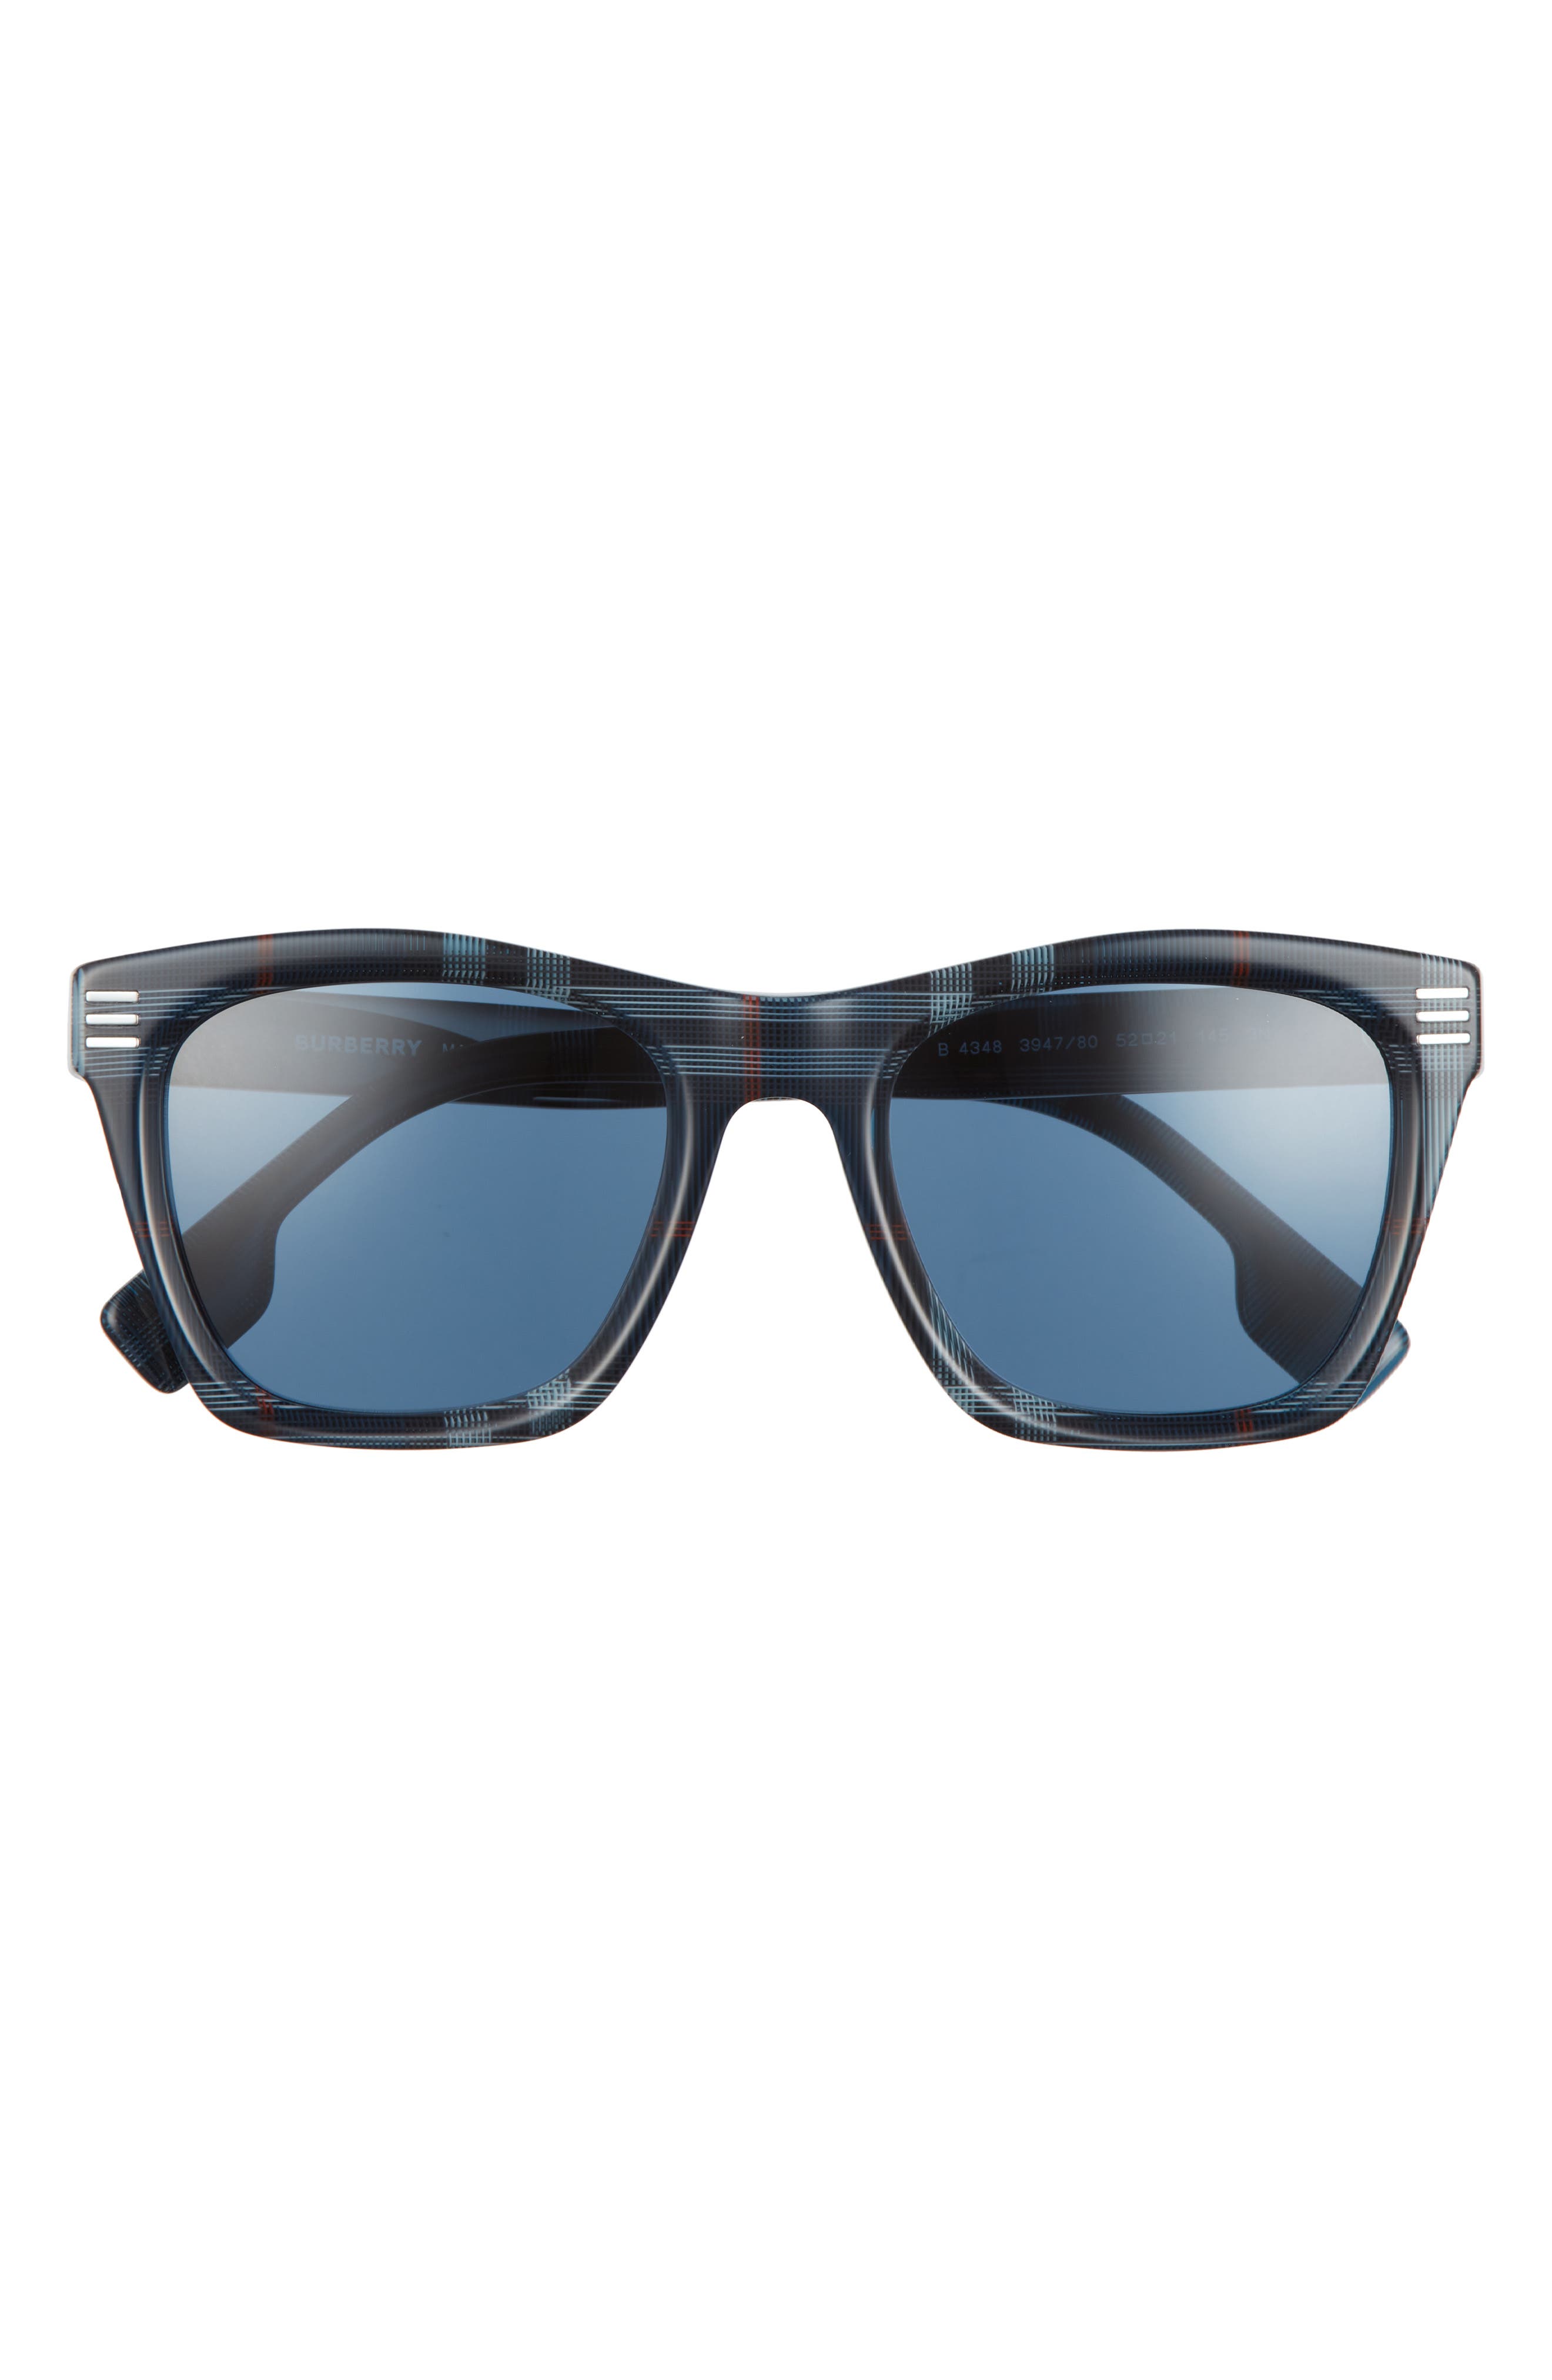 Burberry 52mm Square Sunglasses in Navy Check/Dark Blue at Nordstrom